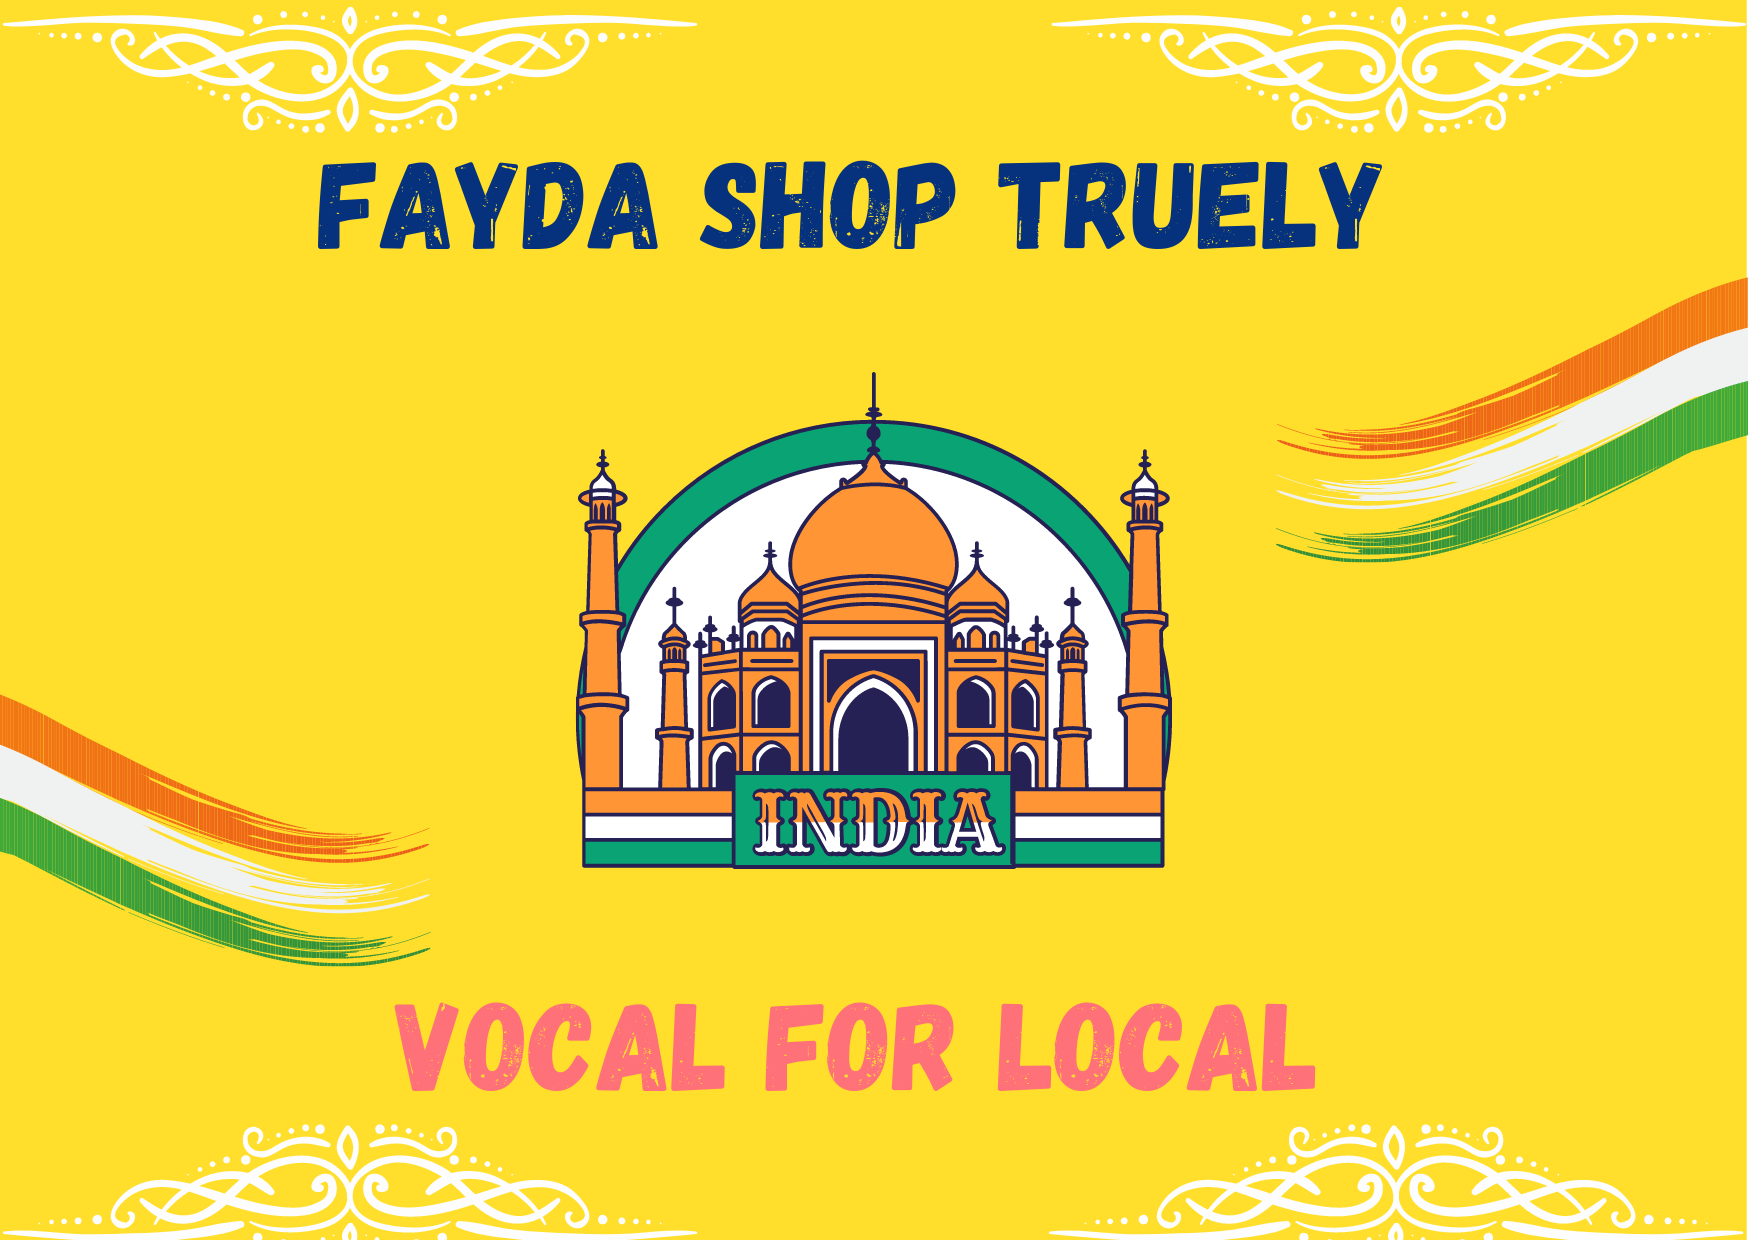 Truly Vocal for Local- Fayda Shop